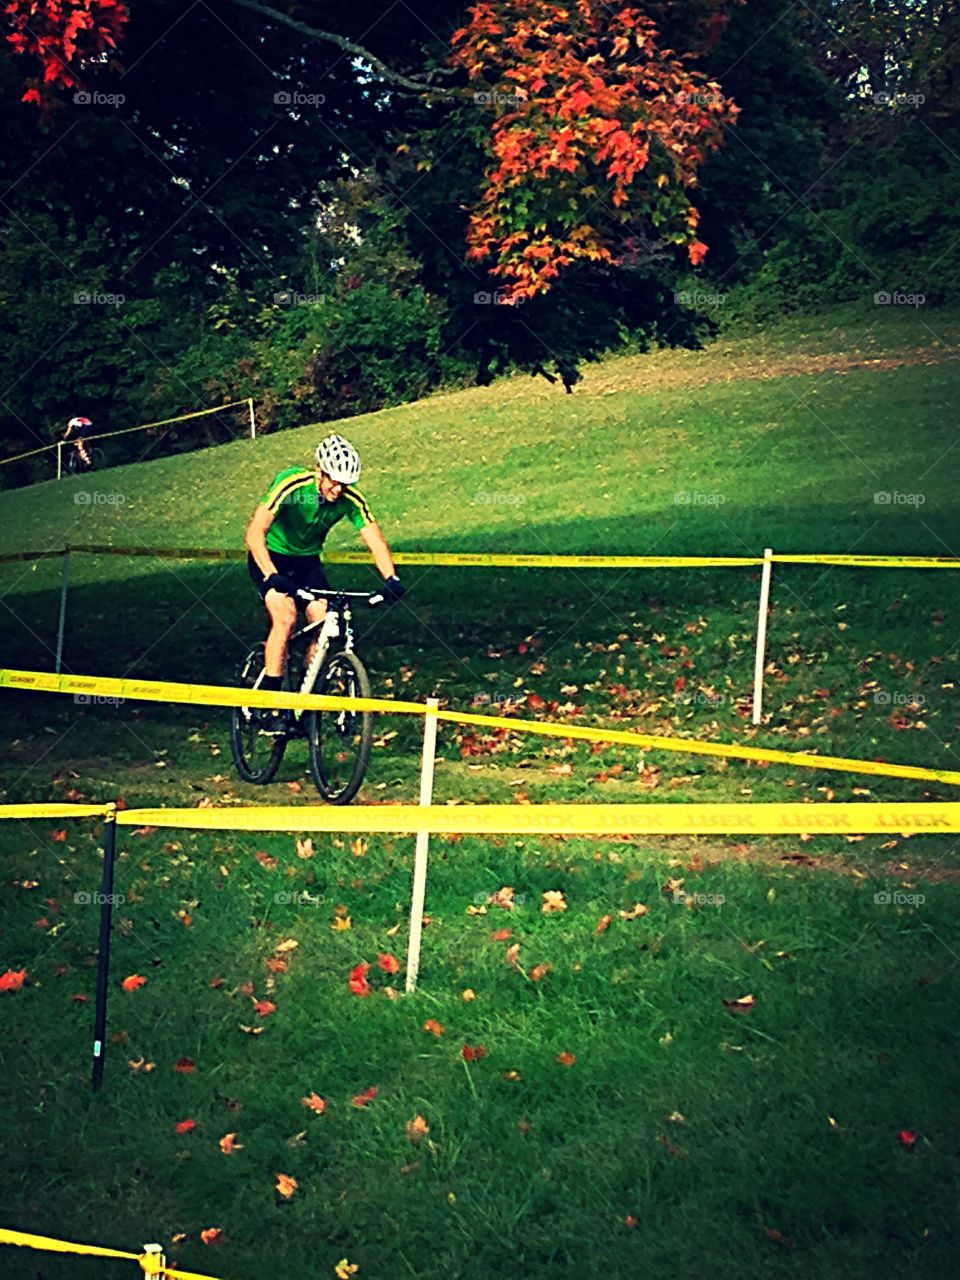 Cyclocross bicycle race in Roanoke, Va in the fall. 